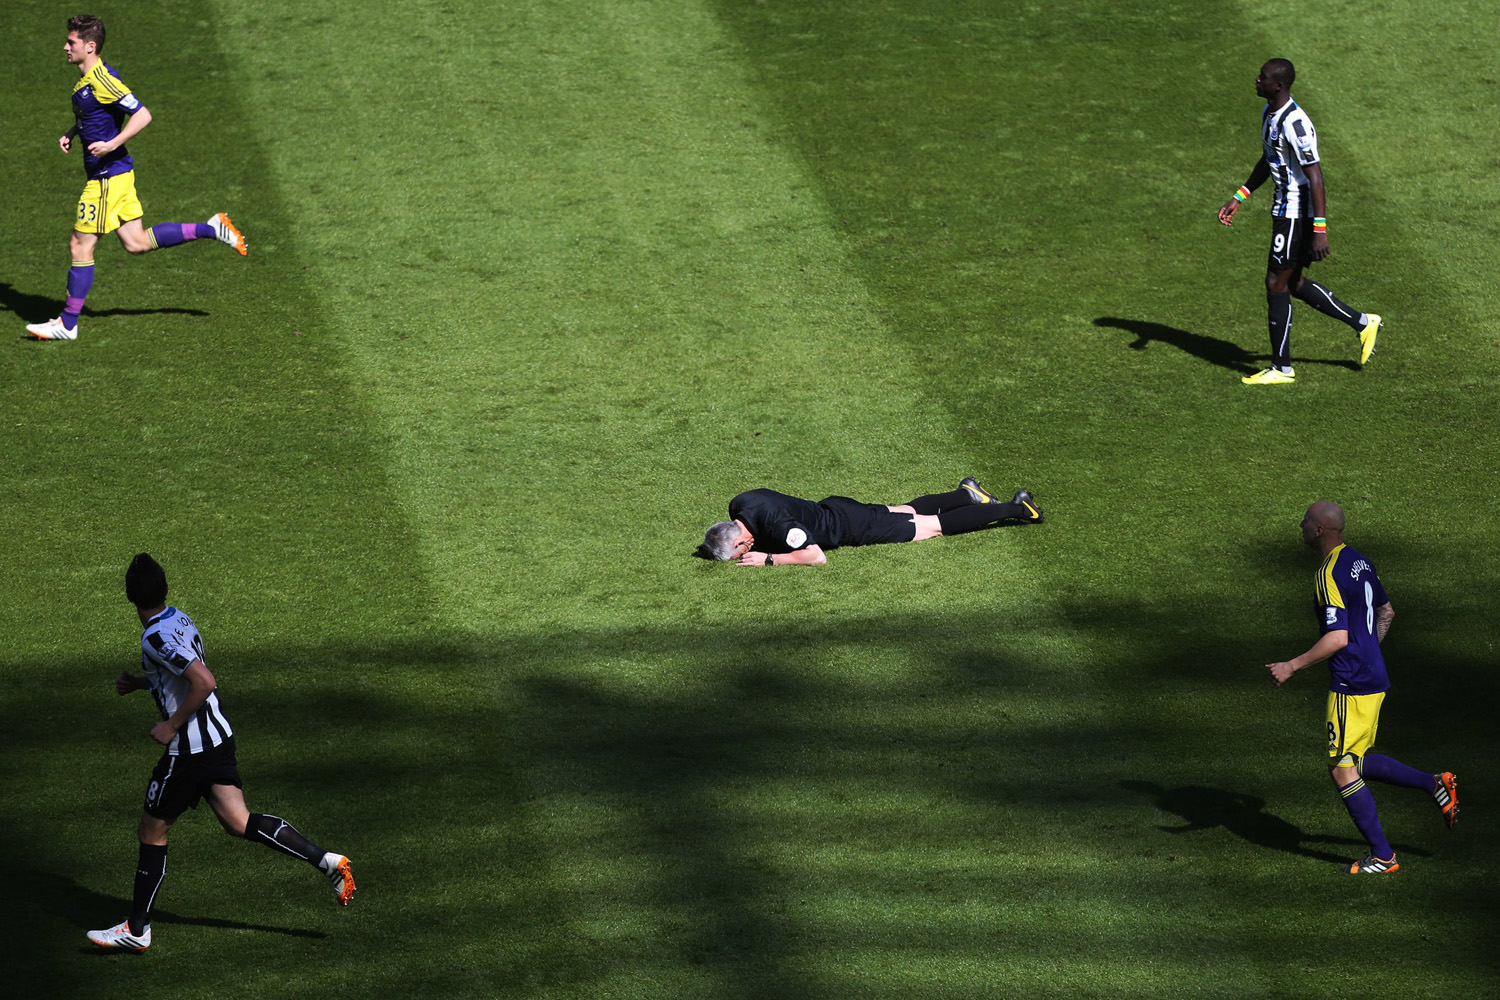 Referee Chris Foy, center, is laid on the pitch after being struck by a ball to the face during the English Premier League soccer match between Newcastle United and Swansea City at St James' Park, Newcastle, England, April 19, 2014.